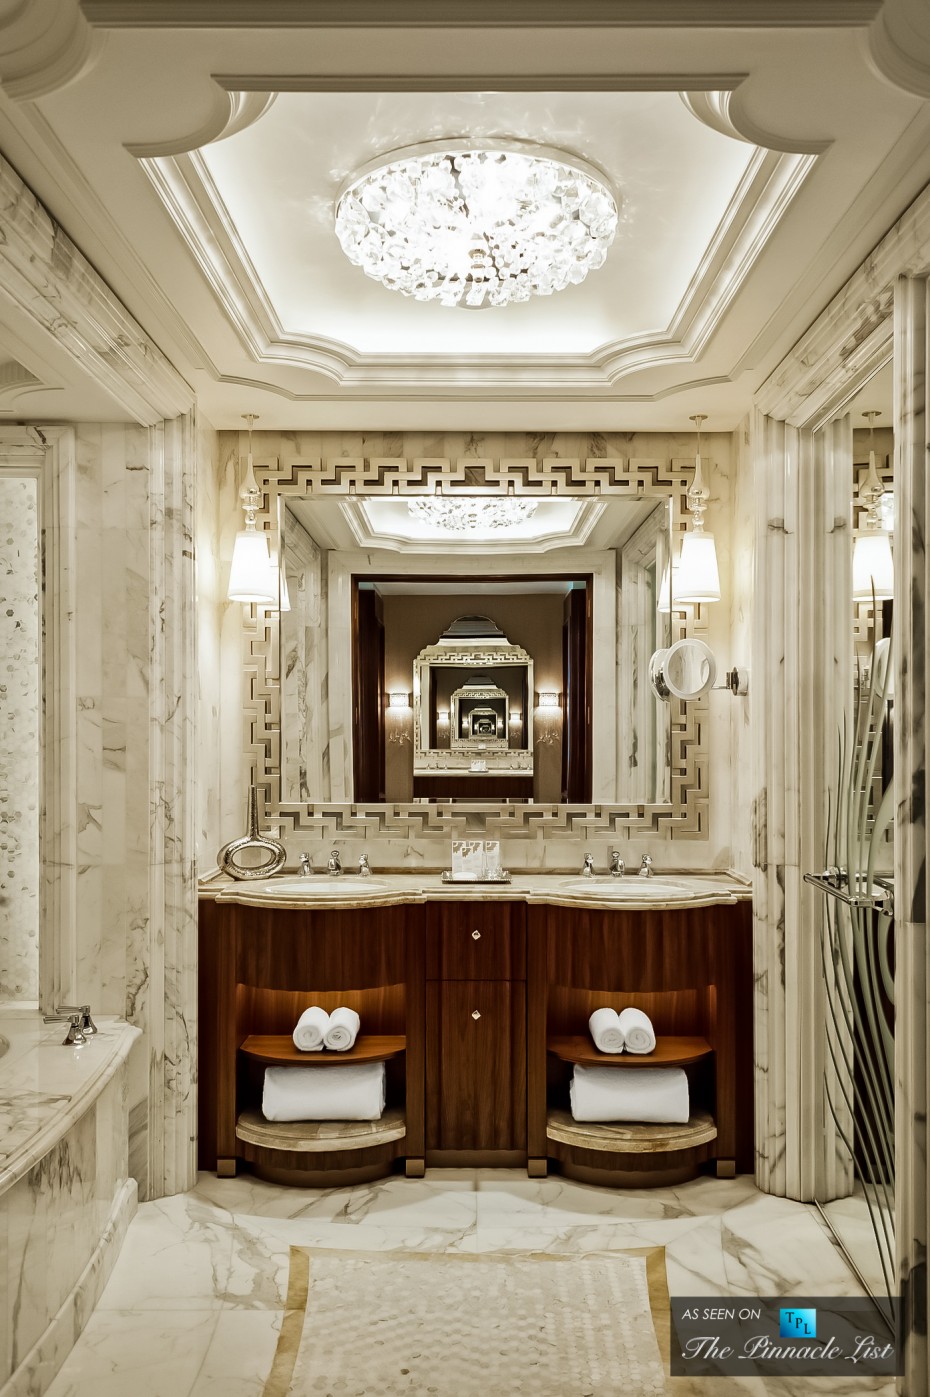 Wonderful White Venetian Hotel Bathroom Escorted By Double Sink Vanities Escorted By Square Mirror Feat Wooden Towel Cabinet As Well As Wall Light Fixtures As Luxury Interior Bathroom Schemes Soothing Bathroom